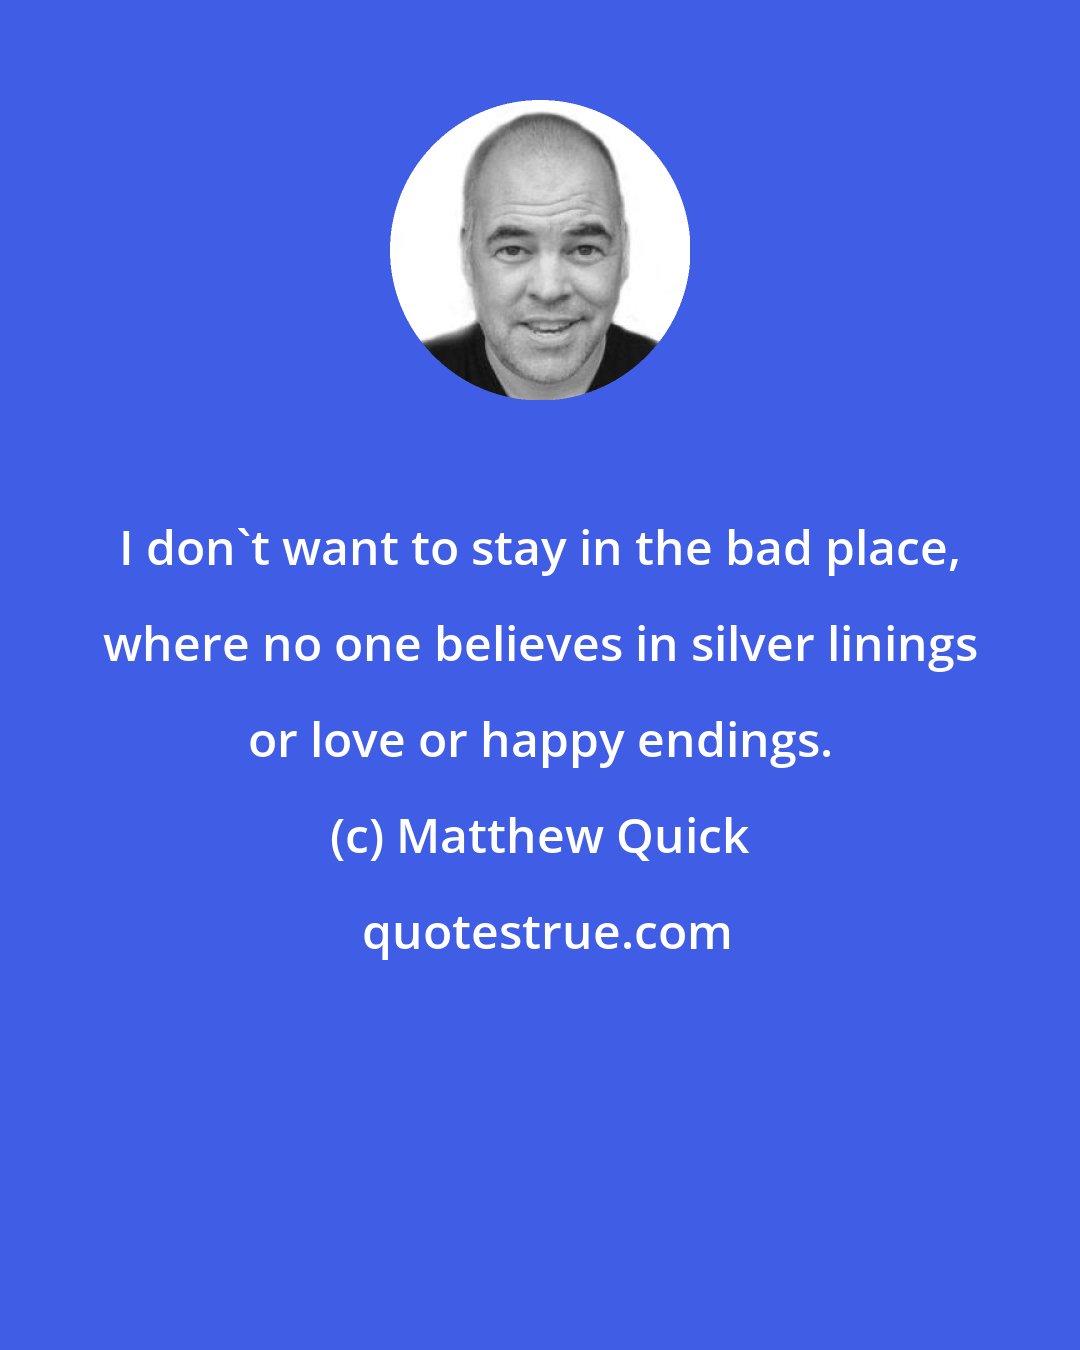 Matthew Quick: I don't want to stay in the bad place, where no one believes in silver linings or love or happy endings.